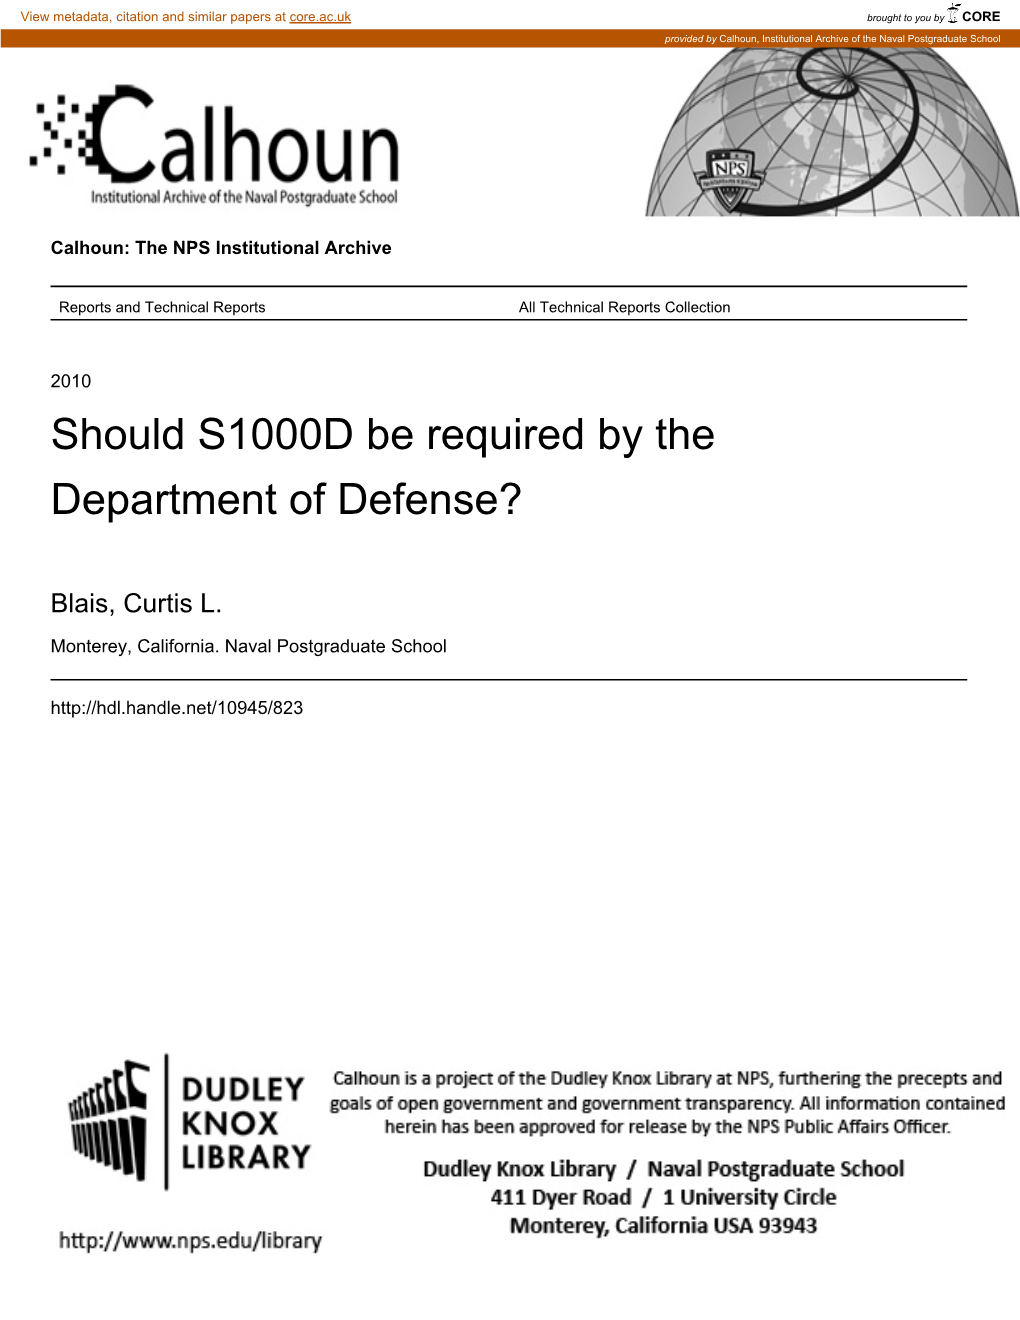 Should S1000D Be Required by the Department of Defense?